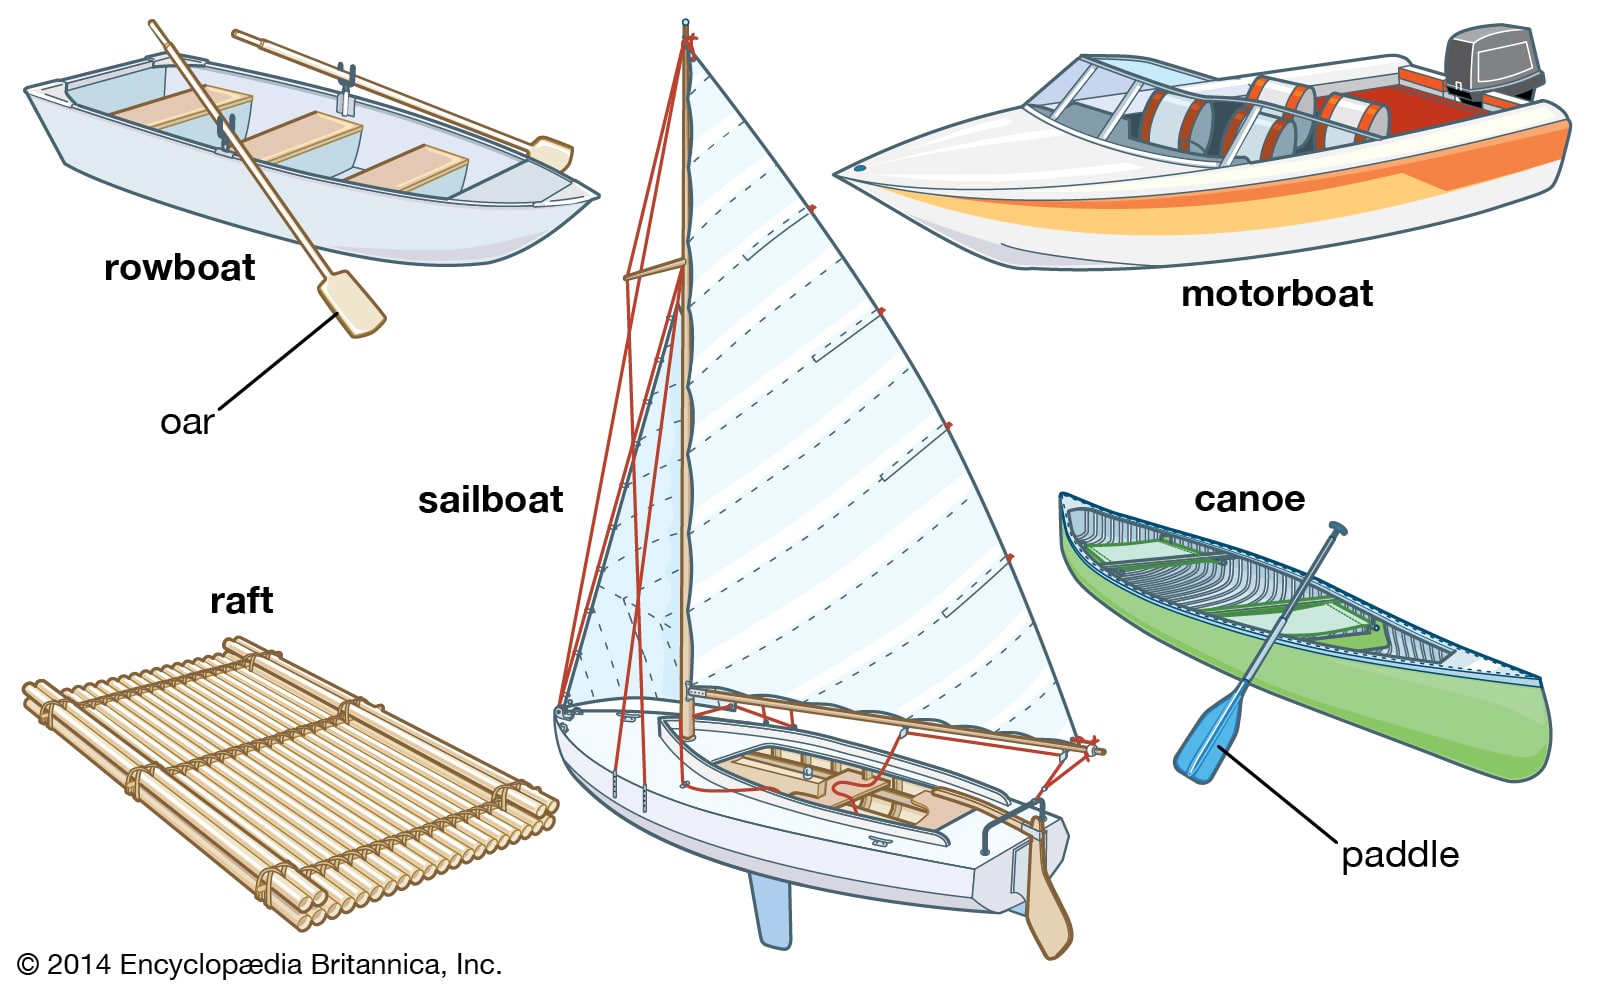 Different Types of Boats